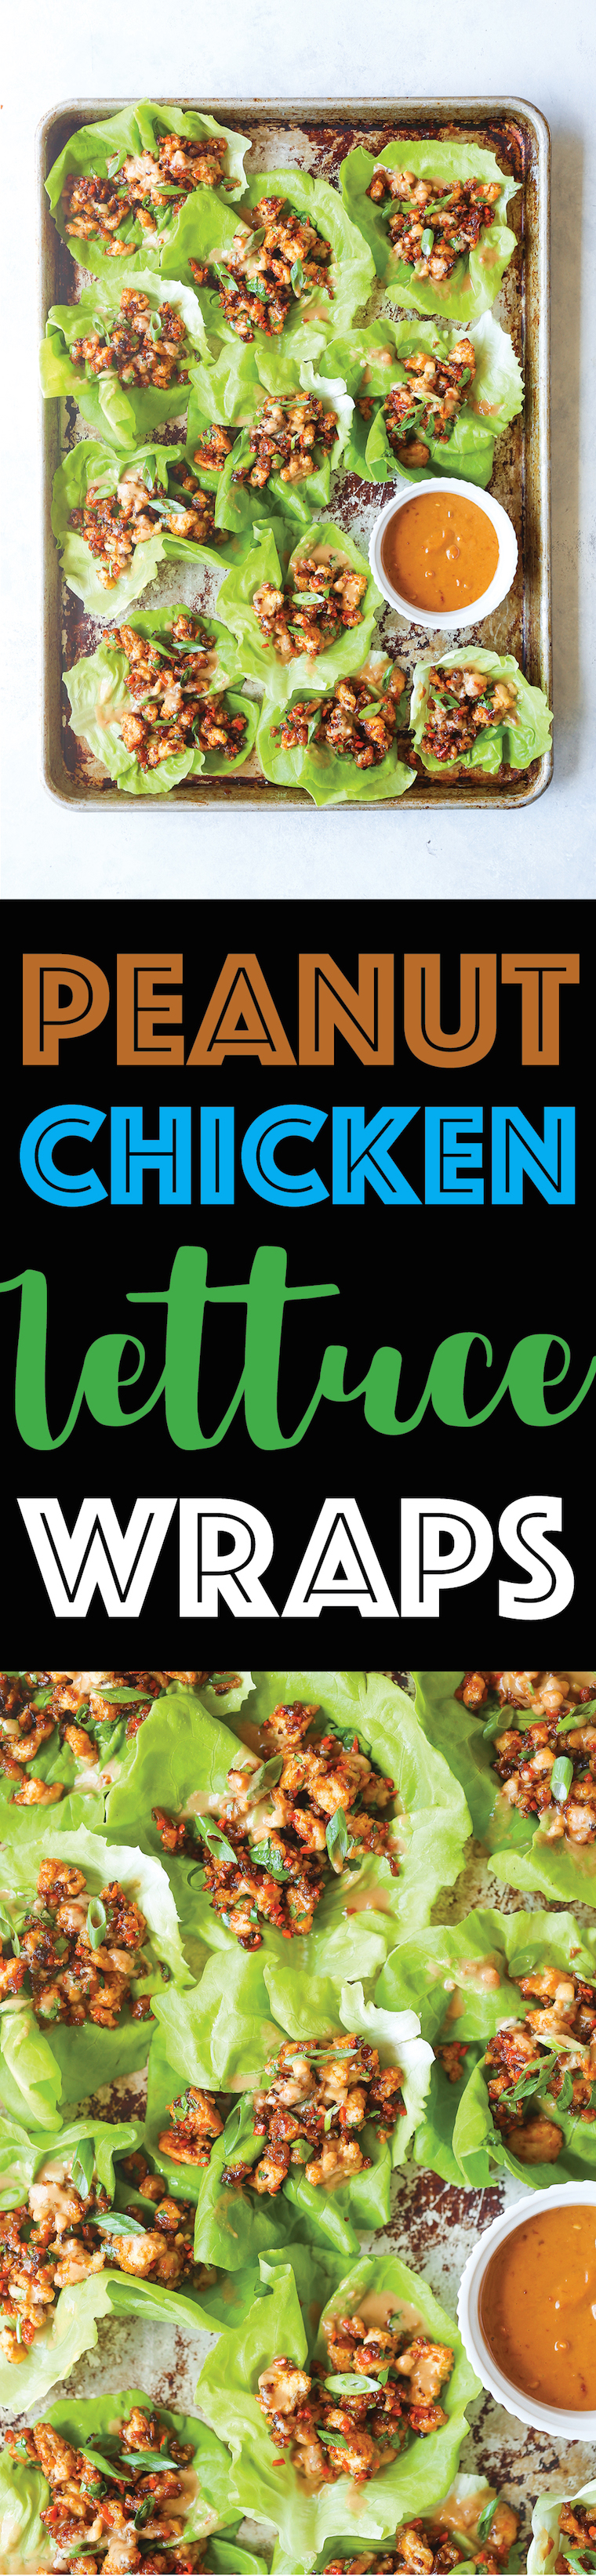 Peanut Chicken Lettuce Wraps - A super quick dinner made in 25 min! It's so hearty, filling, and low-carb, yet the family will still be begging for more!